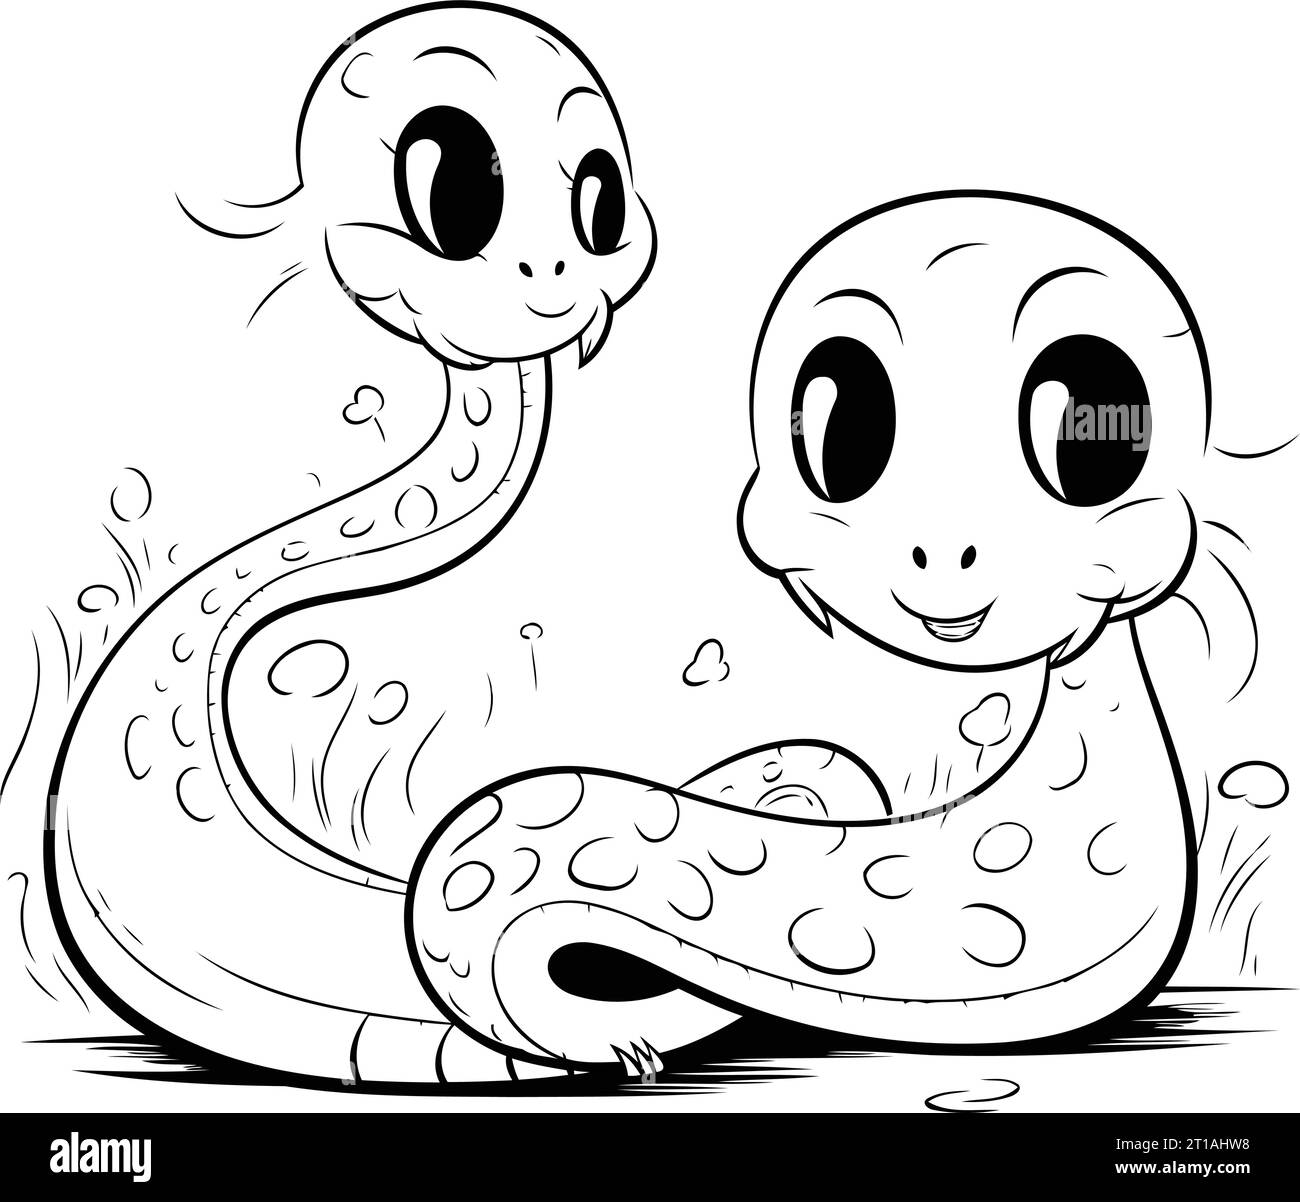 Black and white vector illustration of a snake and a cobra. Stock Vector